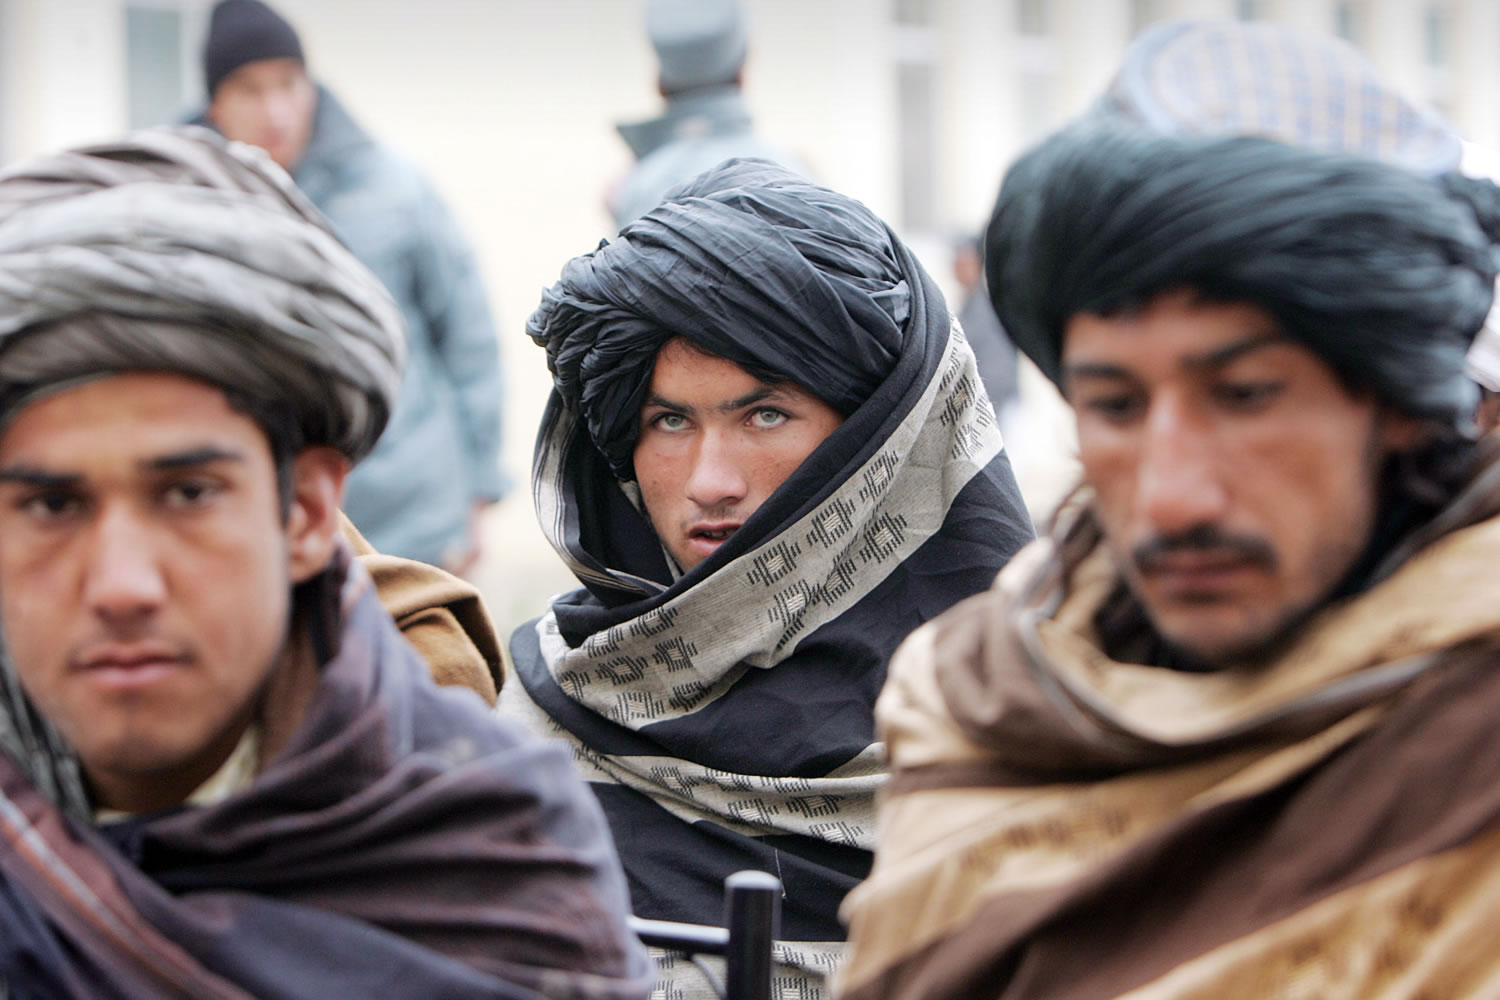 Former Taliban militants attend a ceremony after handing over their weapons in Herat, Afghanistan.